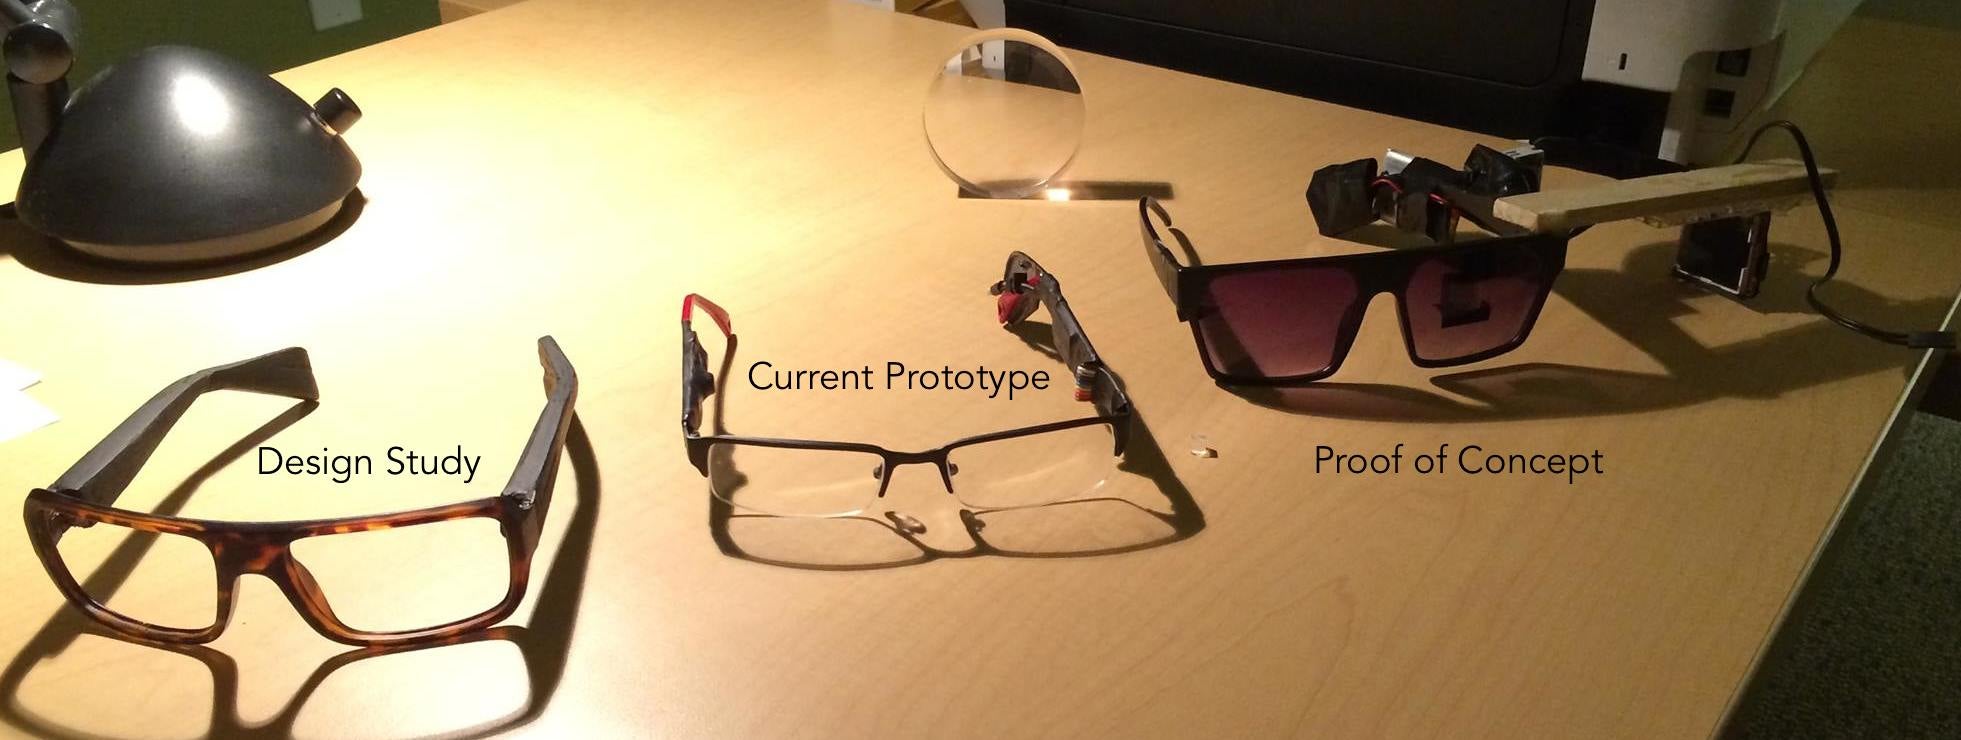 Meet Icis, a less dorky looking version of Google Glass